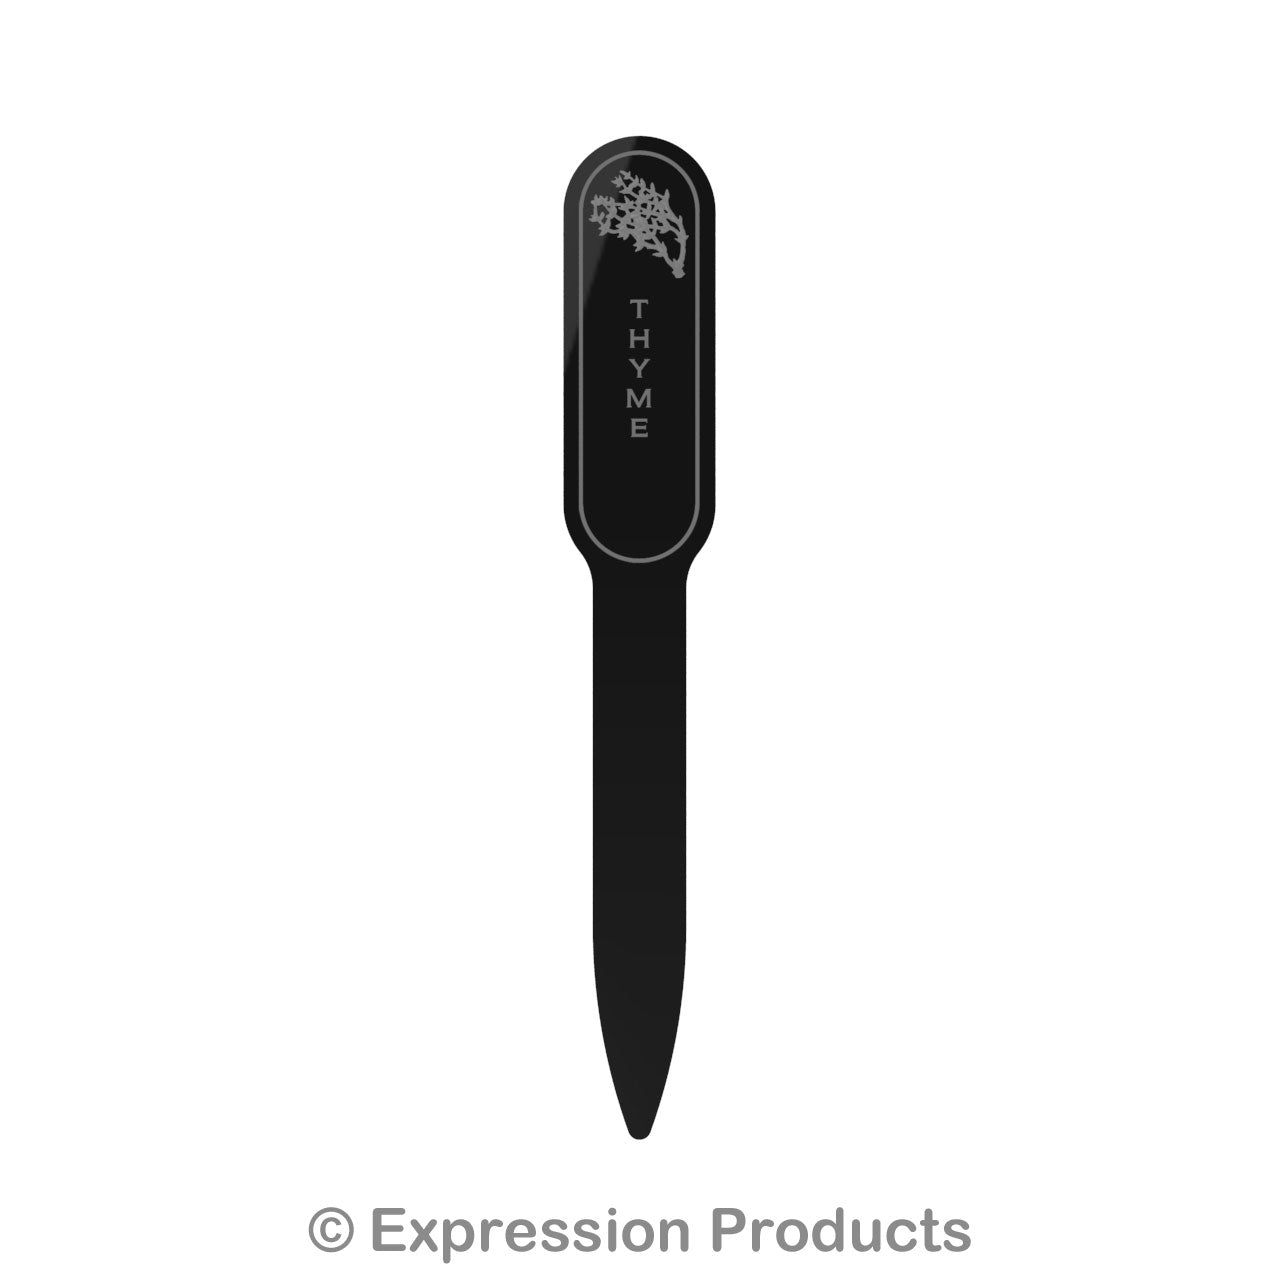 Garden Herb Marker / Label - Etched High Gloss Black Acrylic - Expression Products Ltd